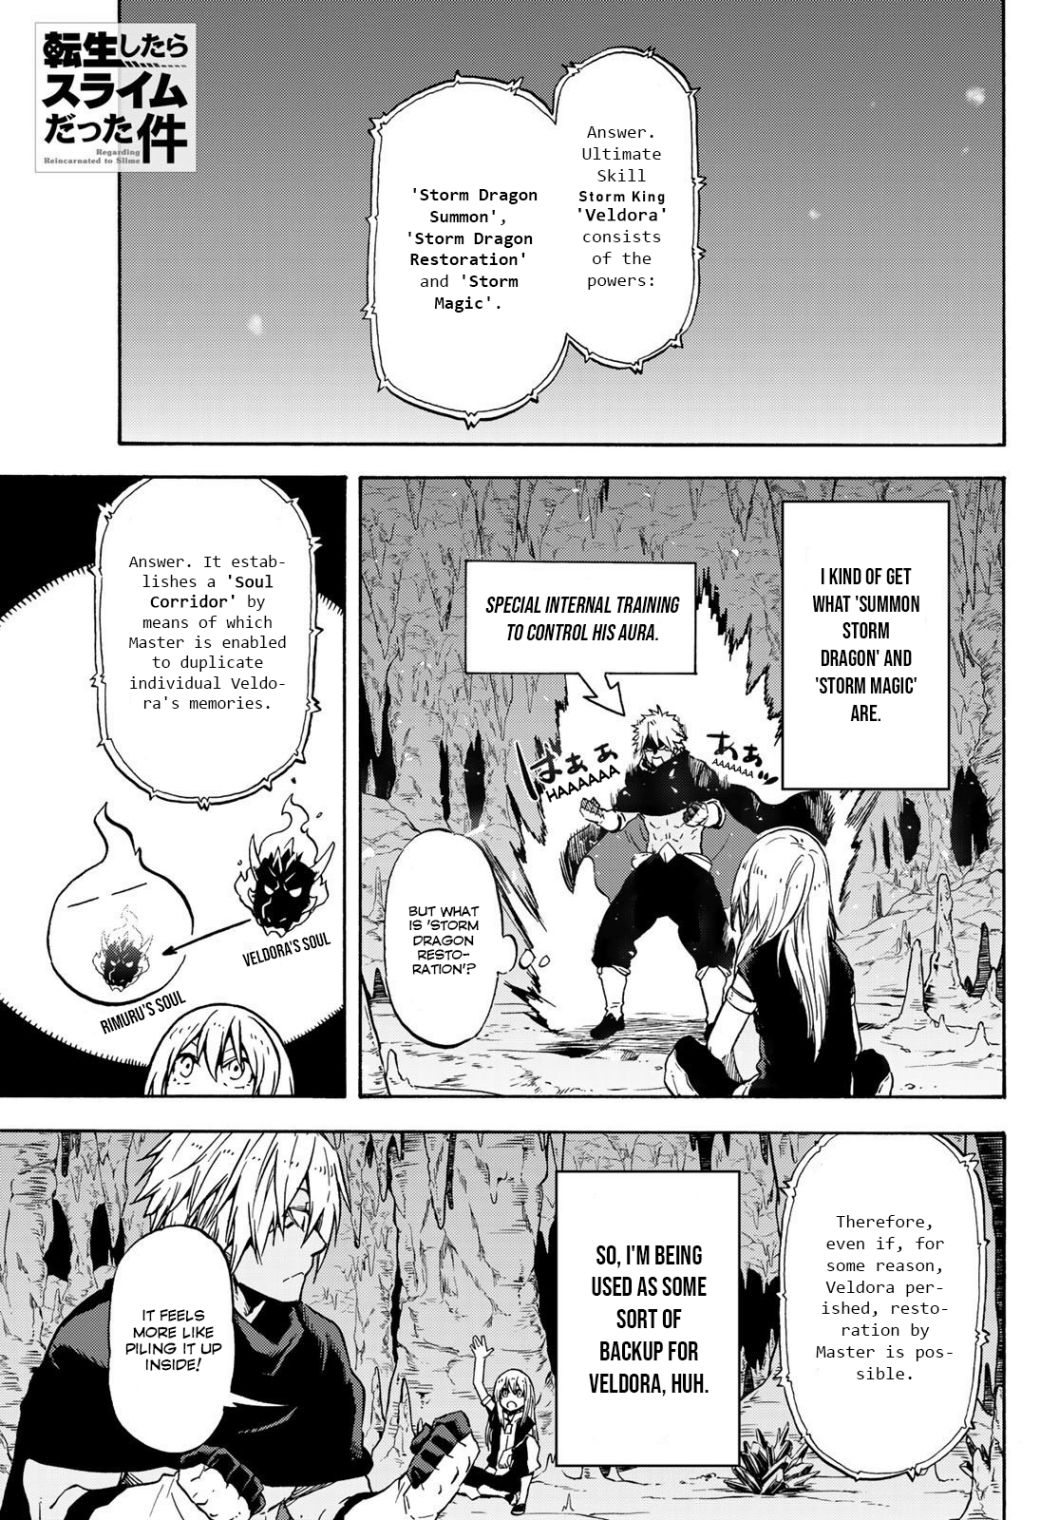 That Time I Got Reincarnated As A Slime - Page 1